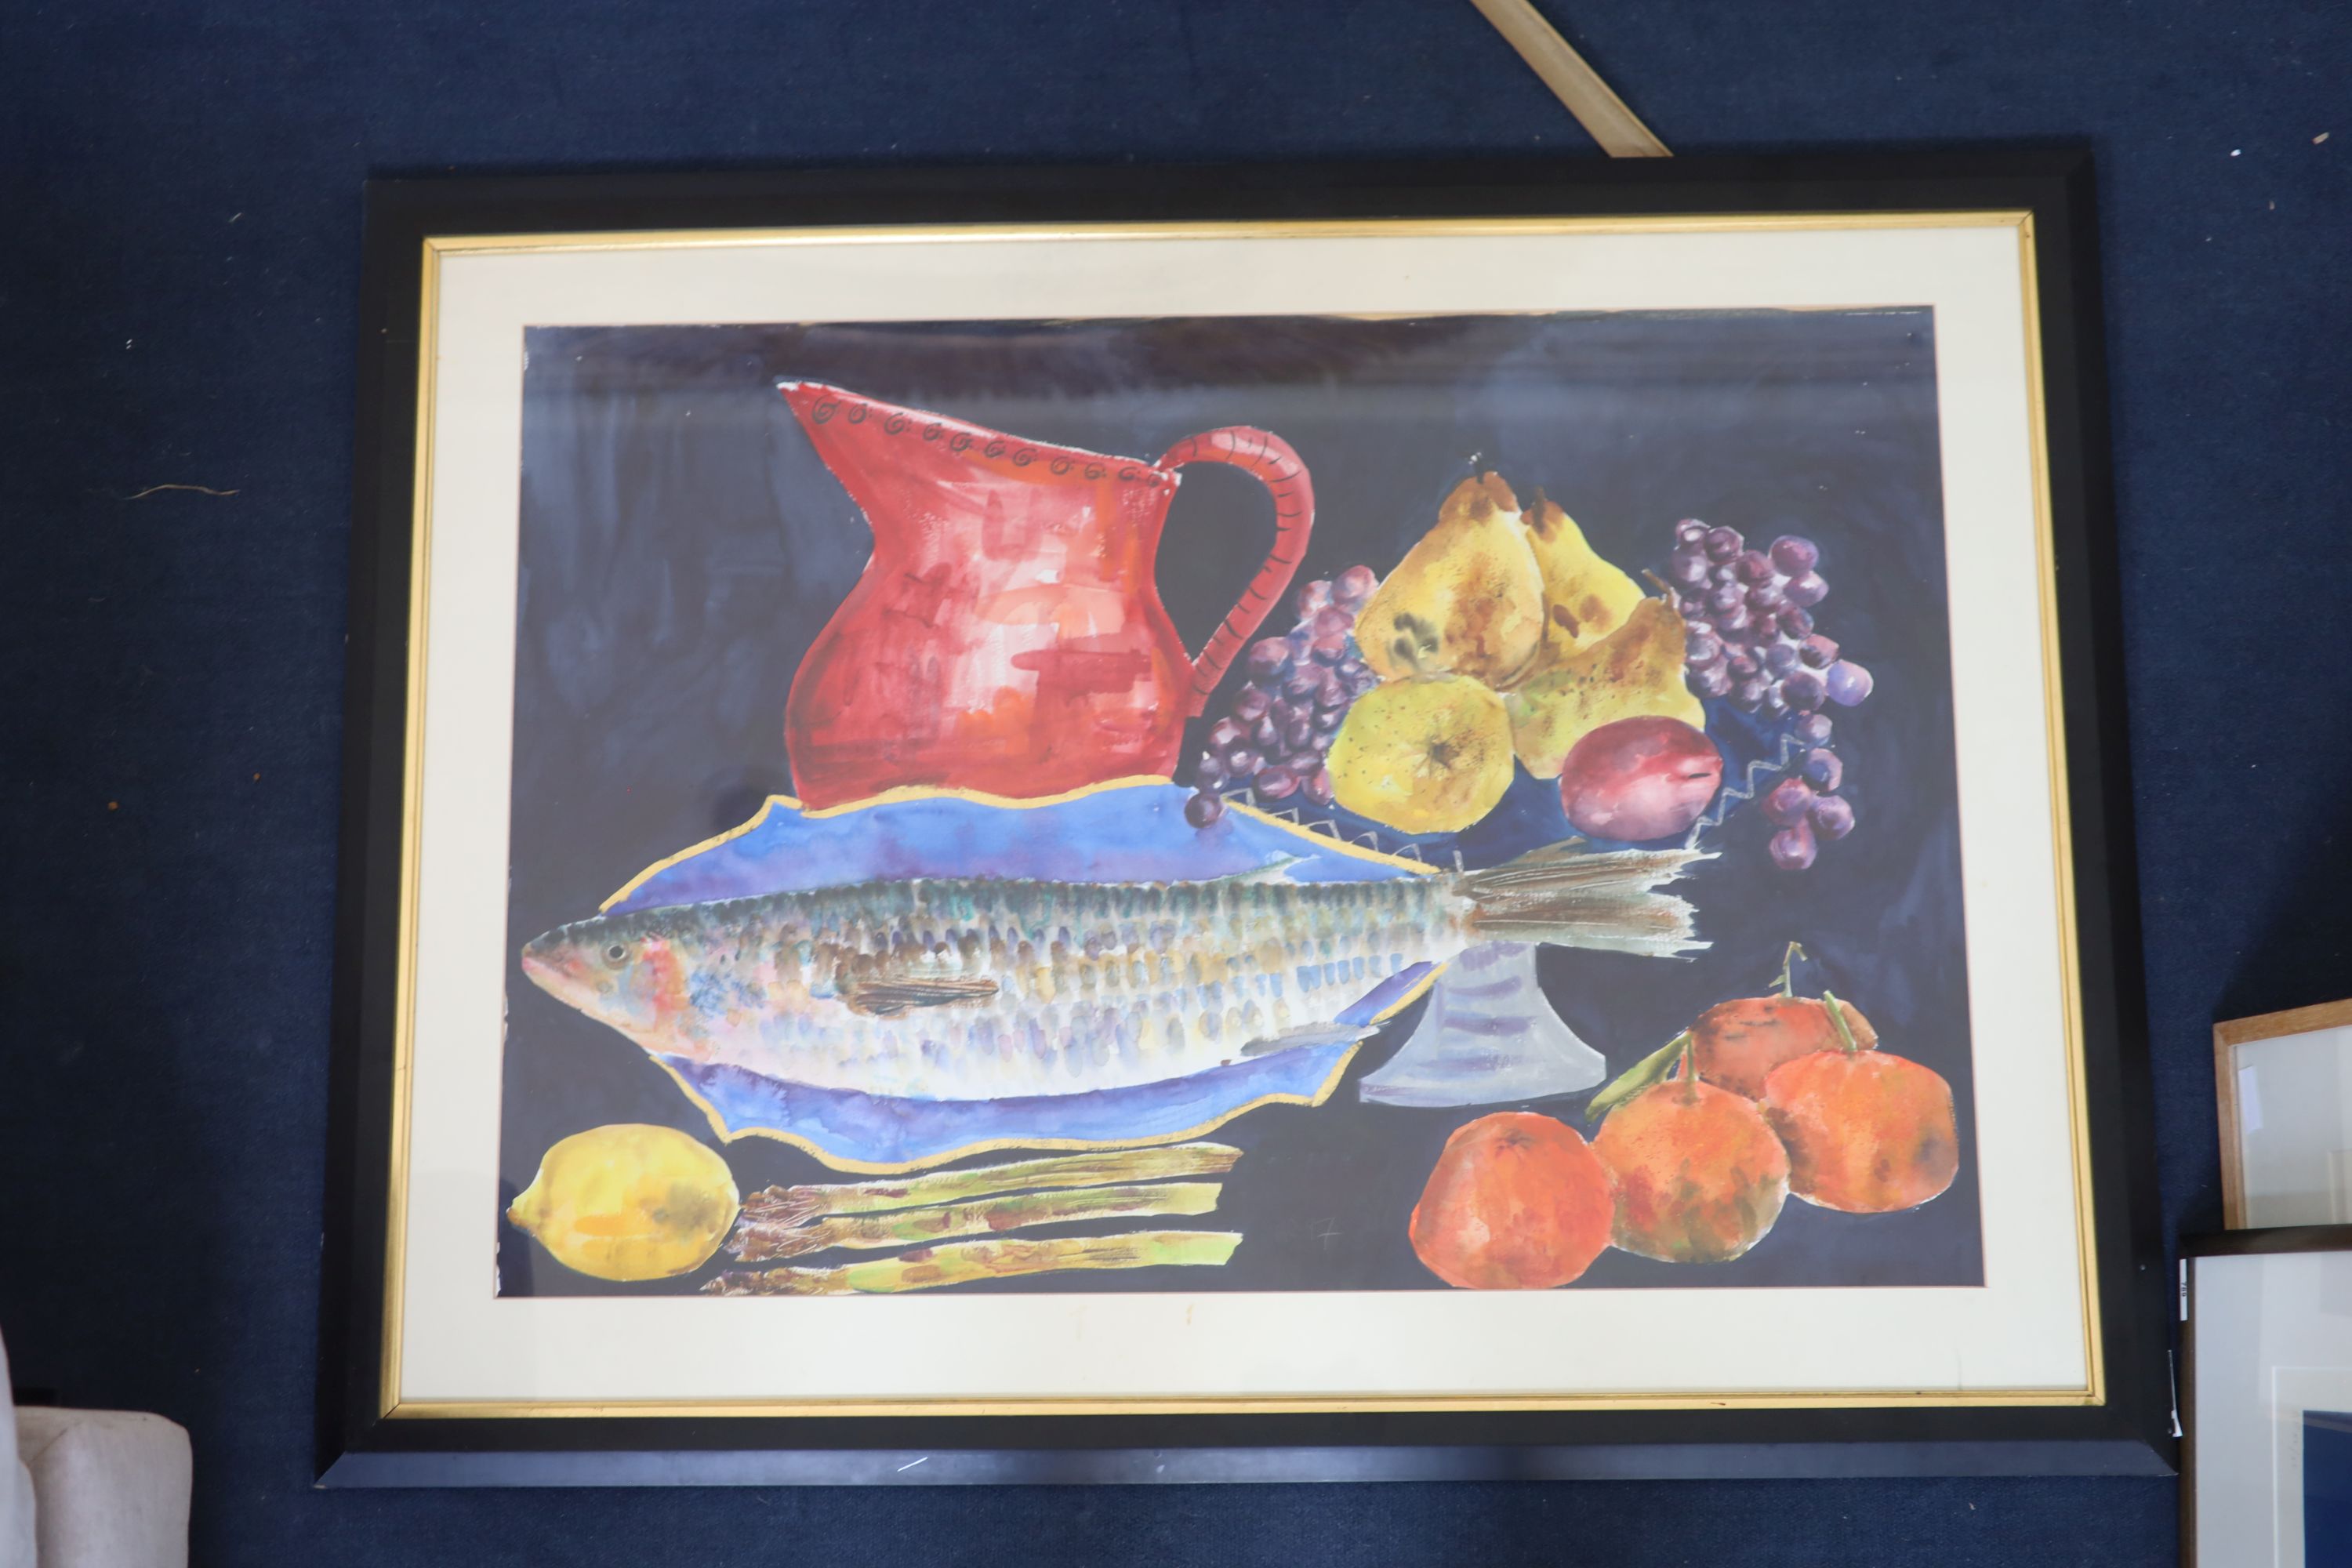 Hillary Rosen, watercolour, Fish with red vase, Boundary Gallery label verso dated 1997, 70 x 100cm